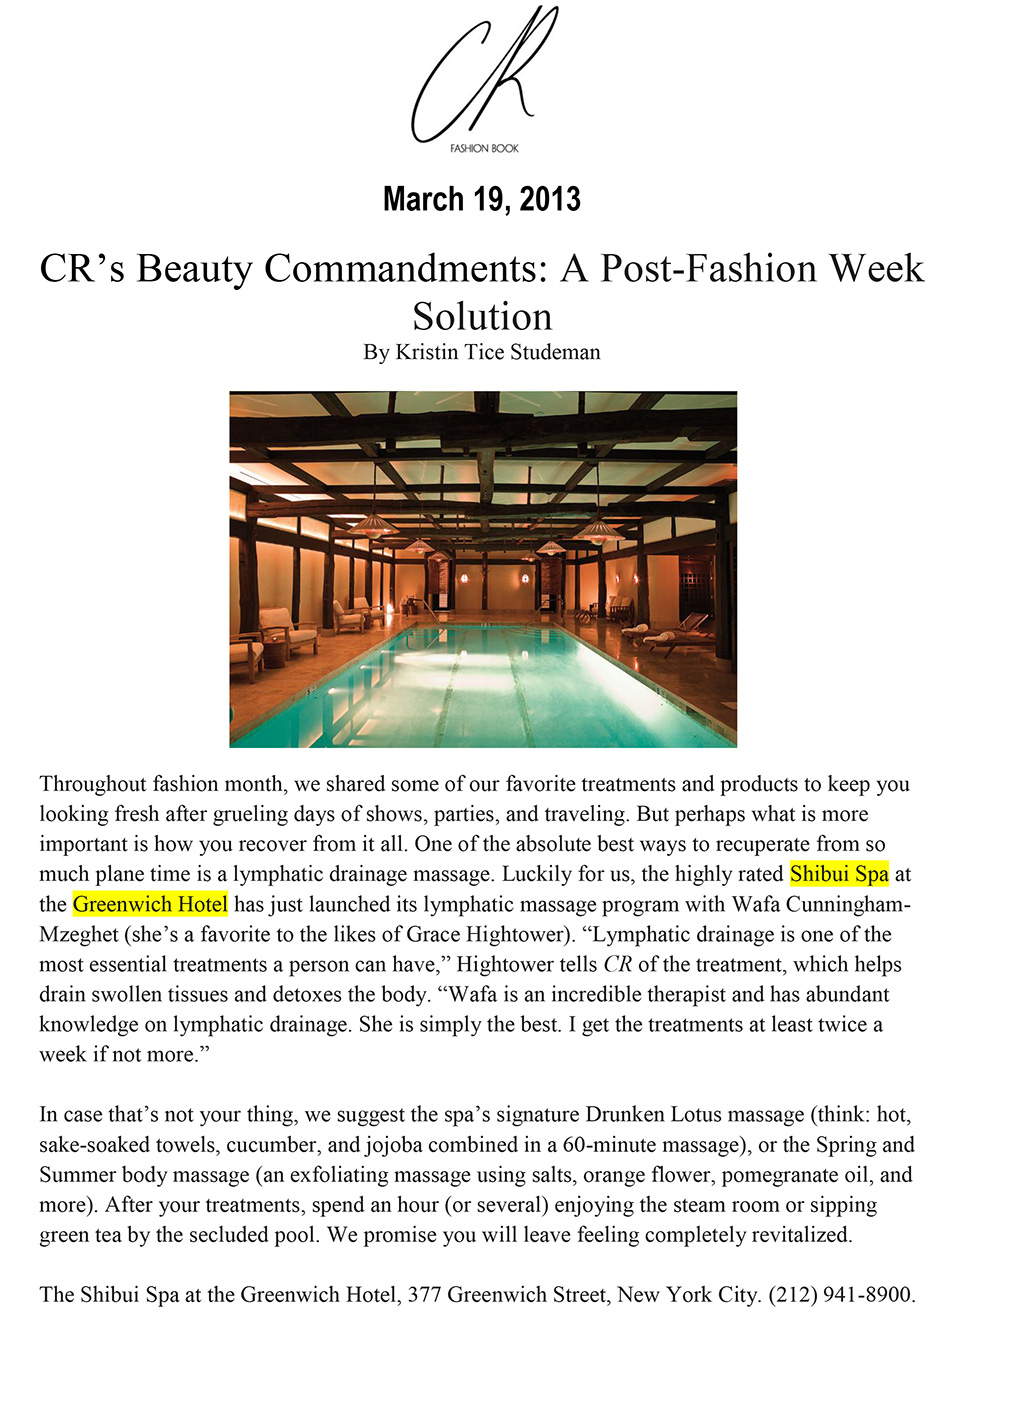 After a busy NY Fashion Week, CR Fashion Book recommends pampering yourself at the Shibui Spa in The Greenwich Hotel in Tribeca